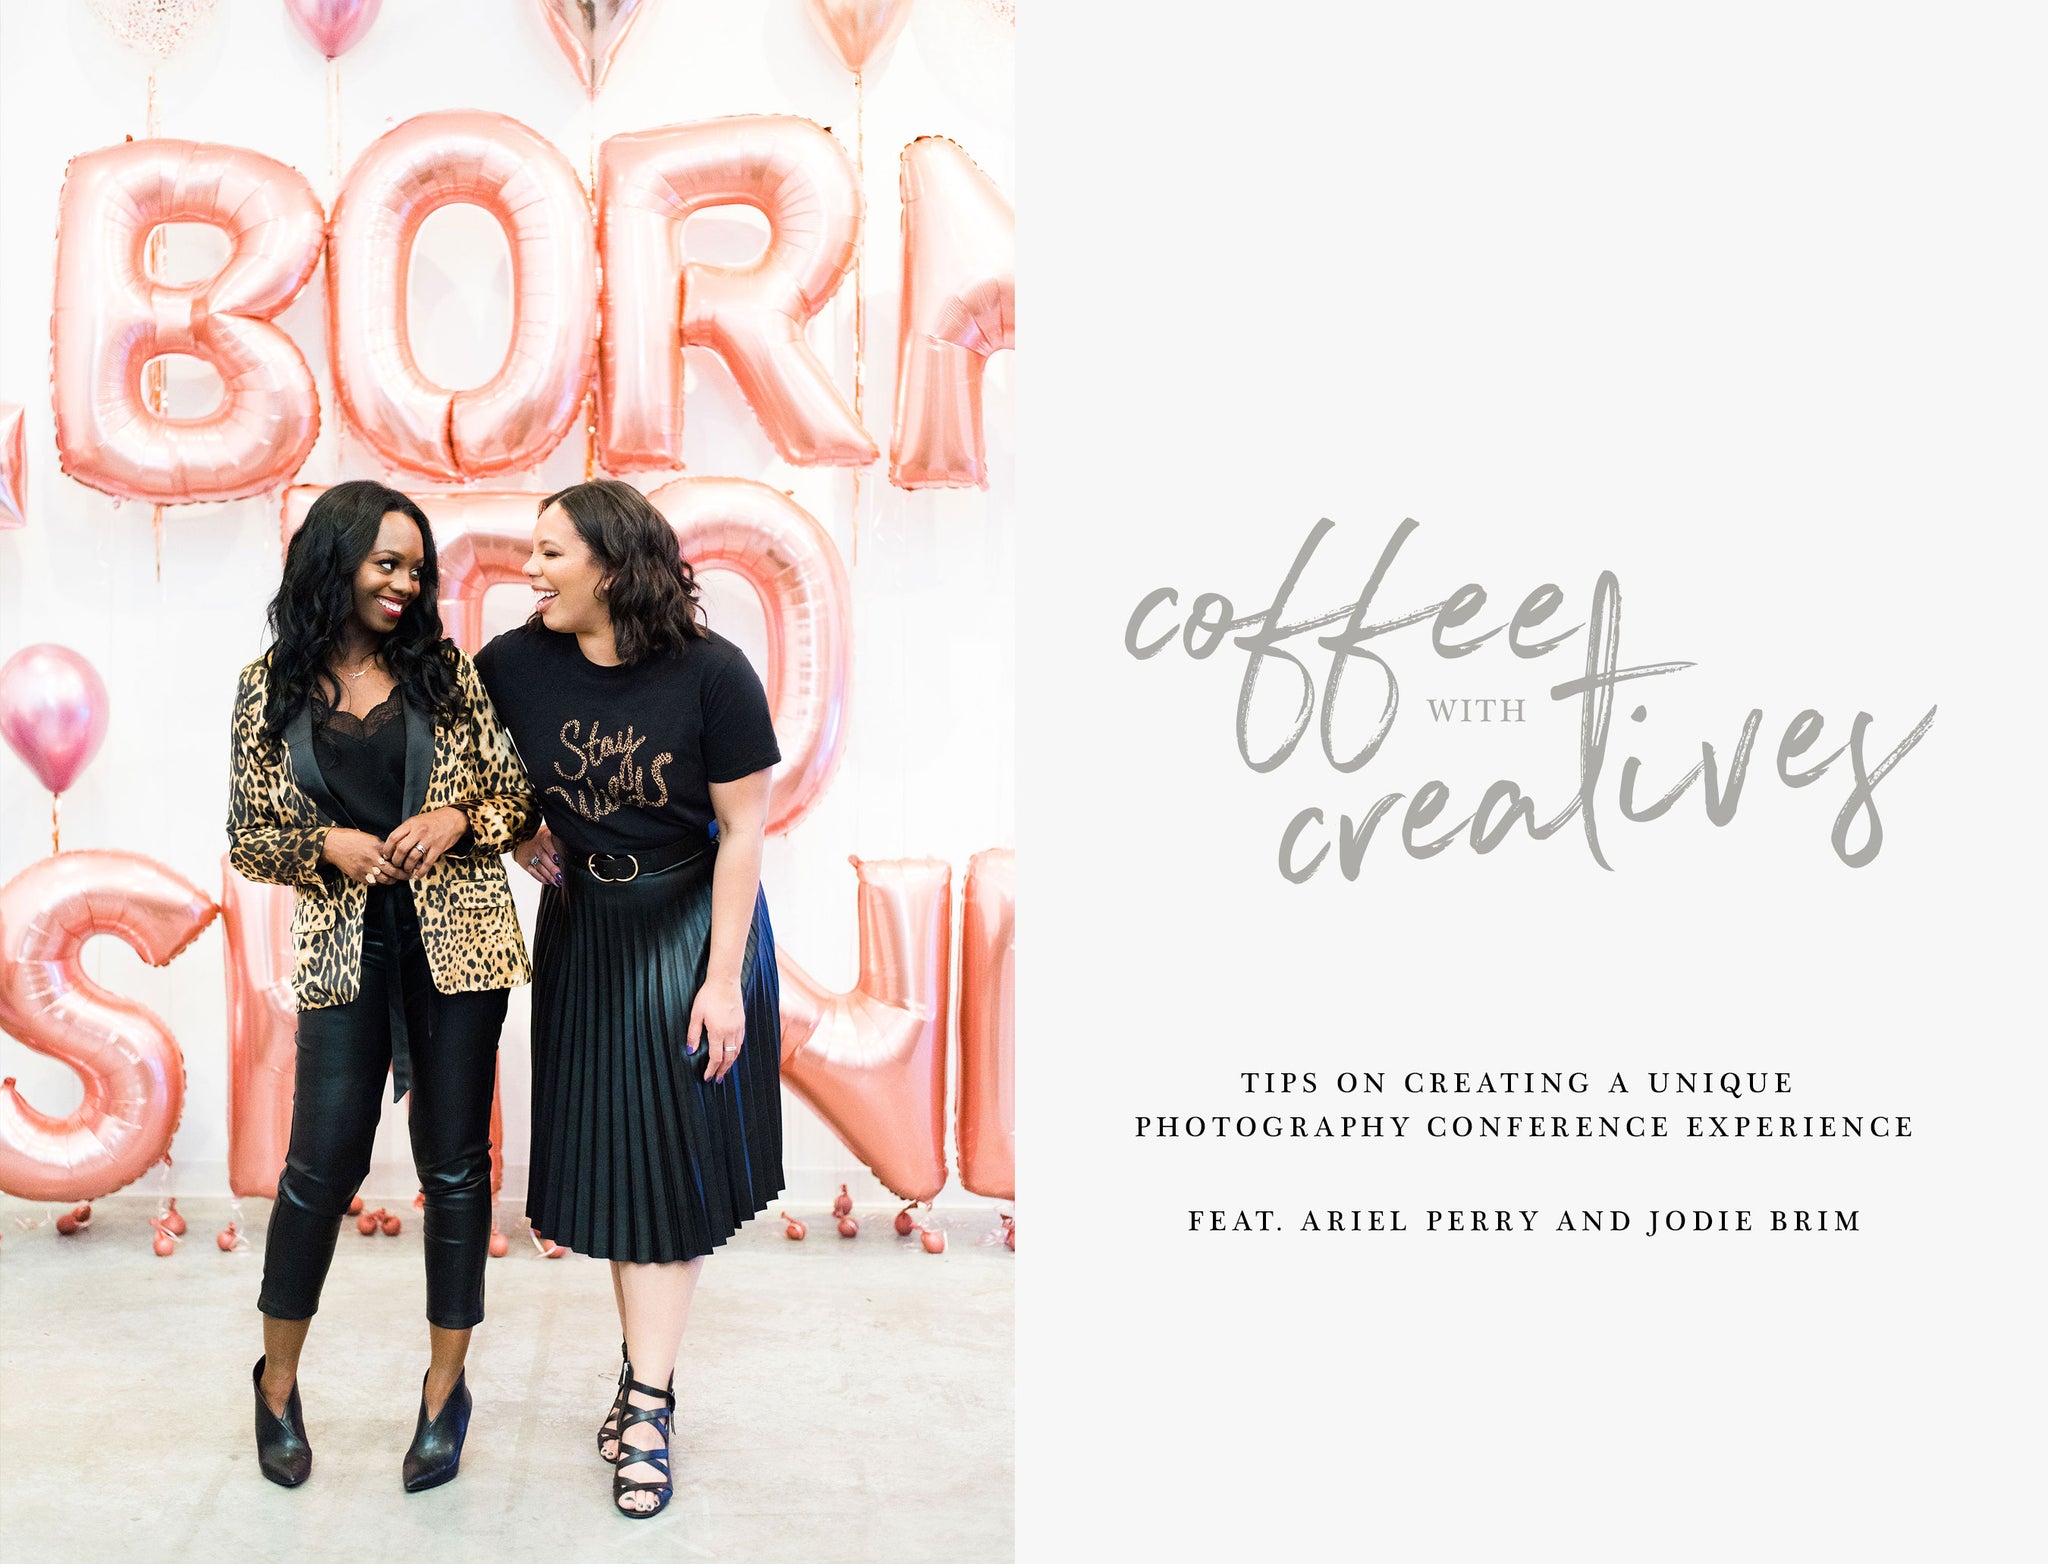 Coffee with Creatives: Tips on Creating a Unique Photography Conference Experience